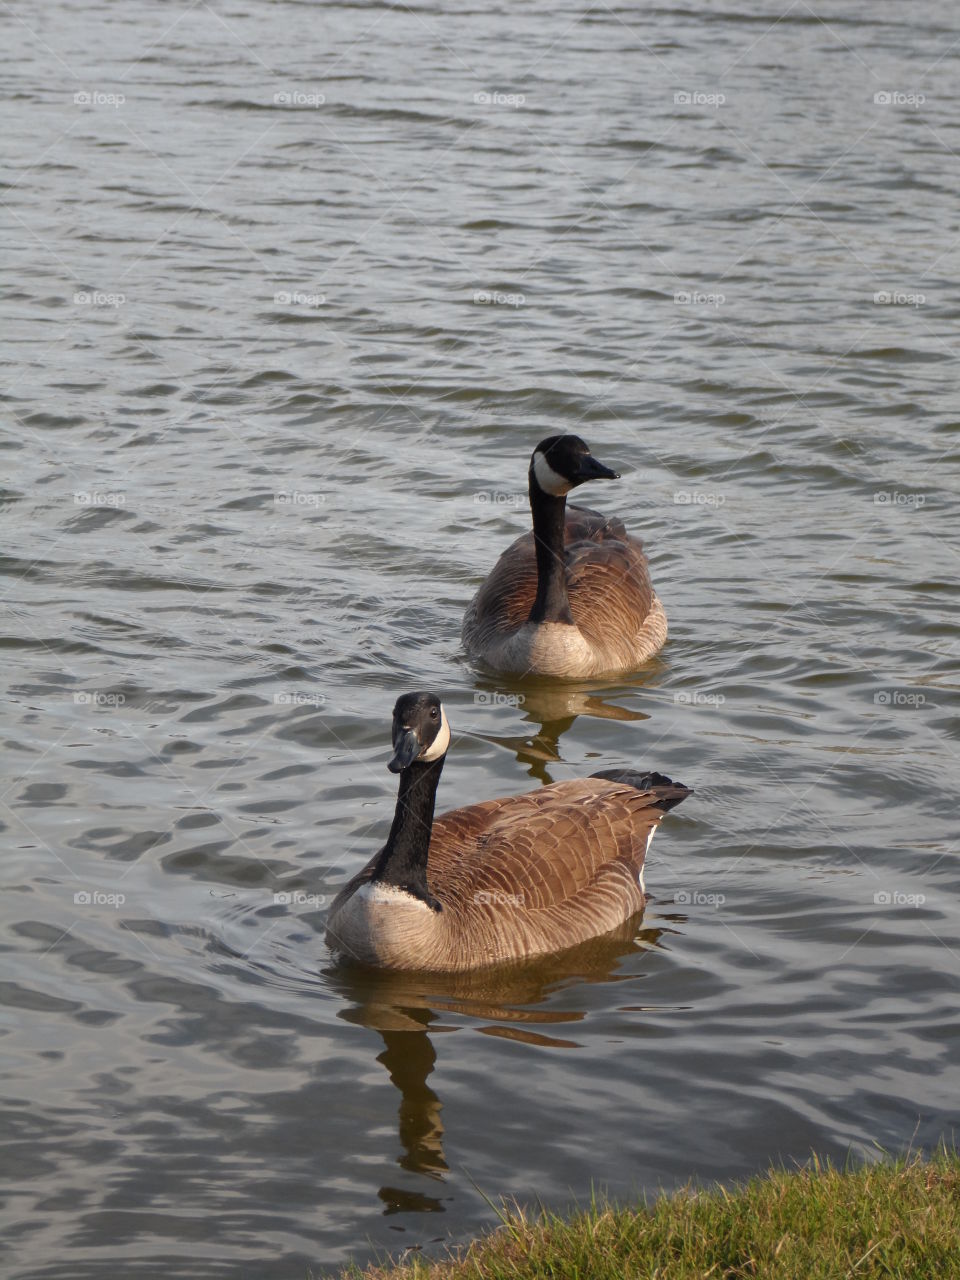 Canadian geese visiting. geese floating towards me